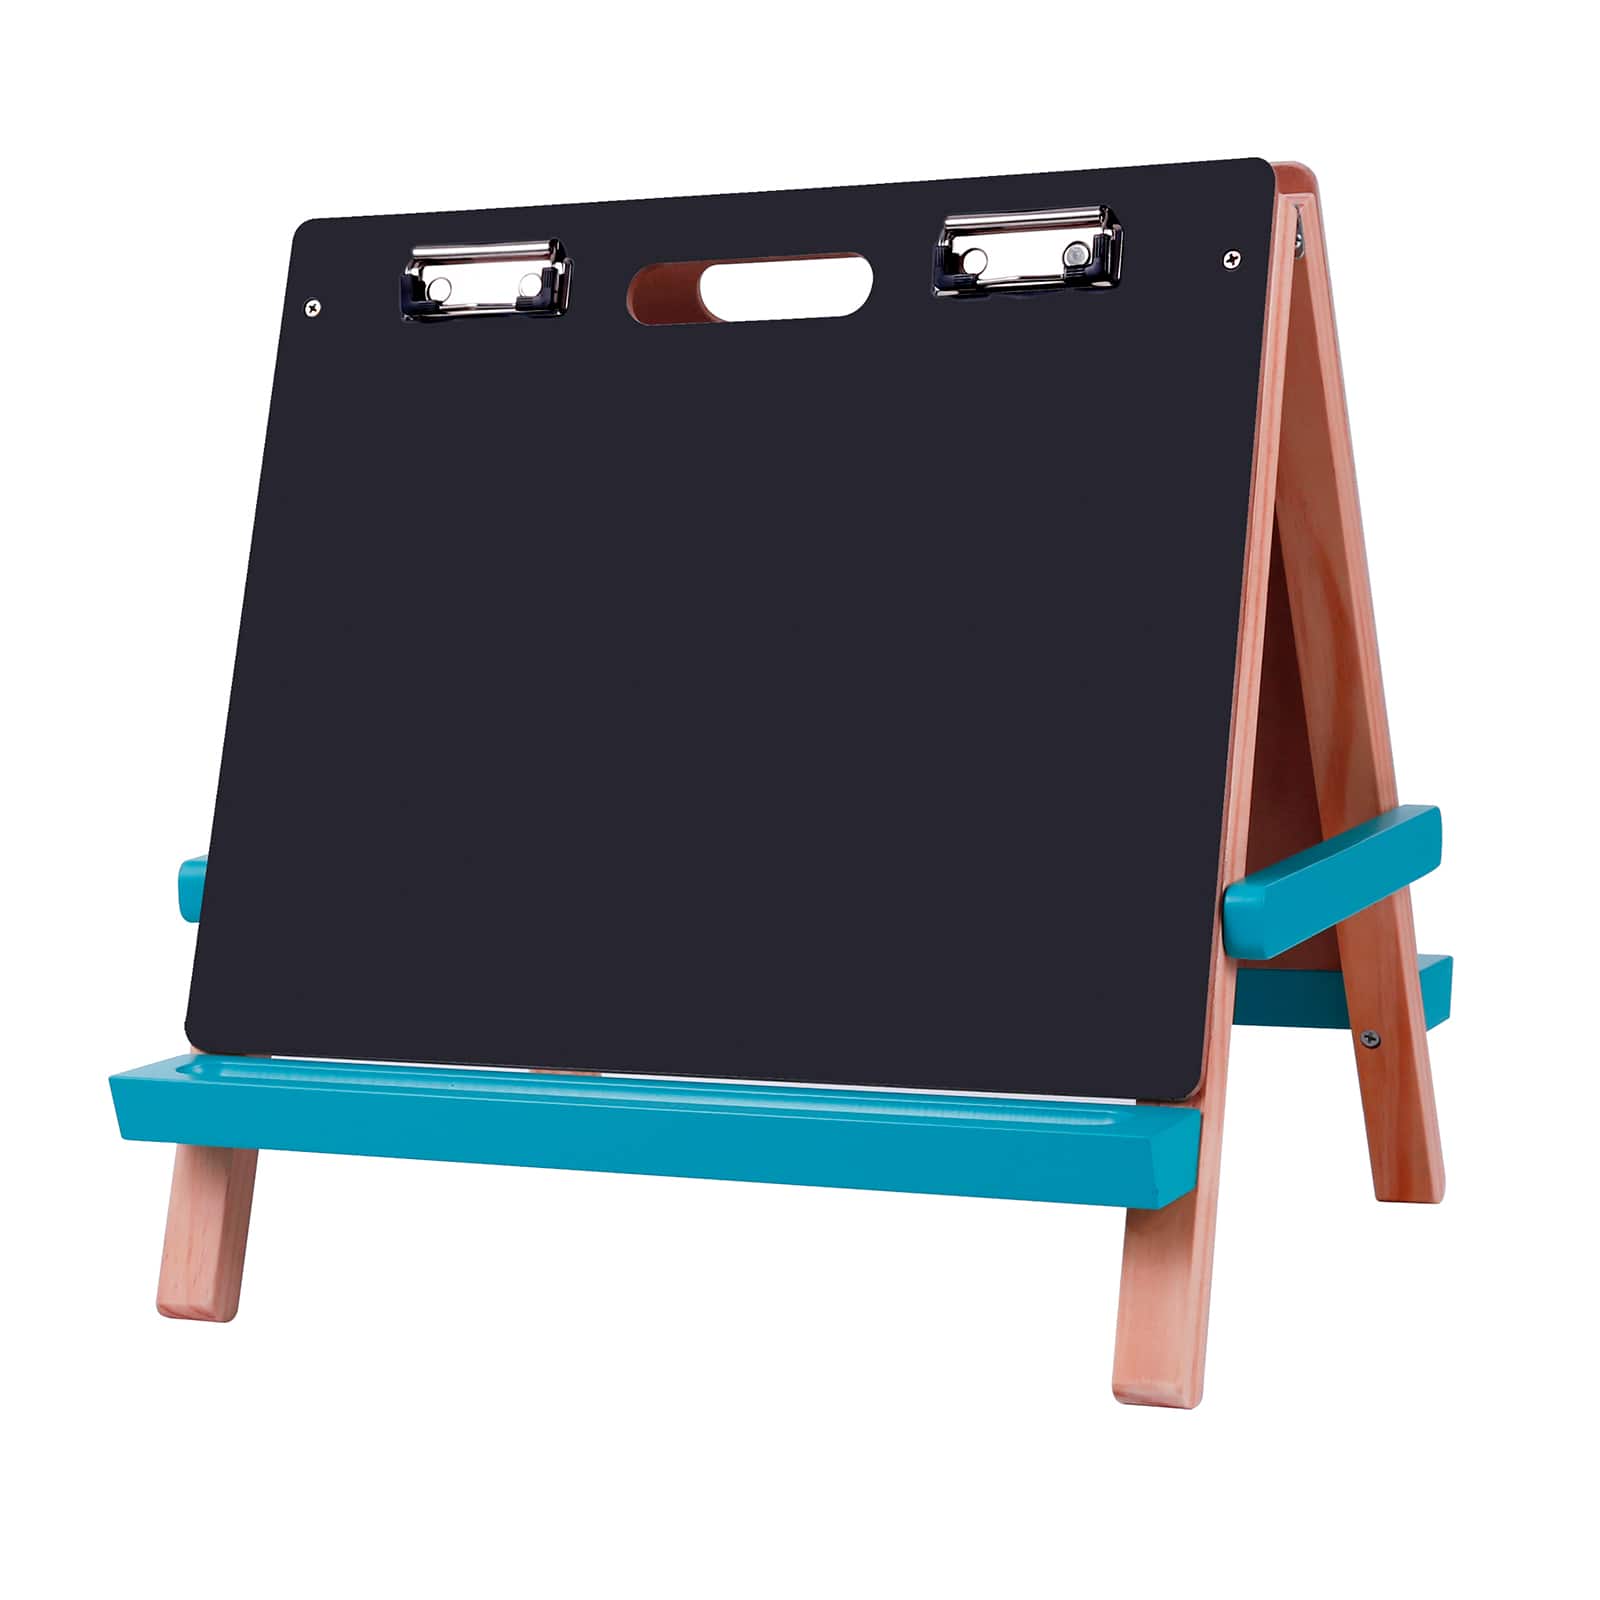 Classroom Painting Easel, 54 x 24